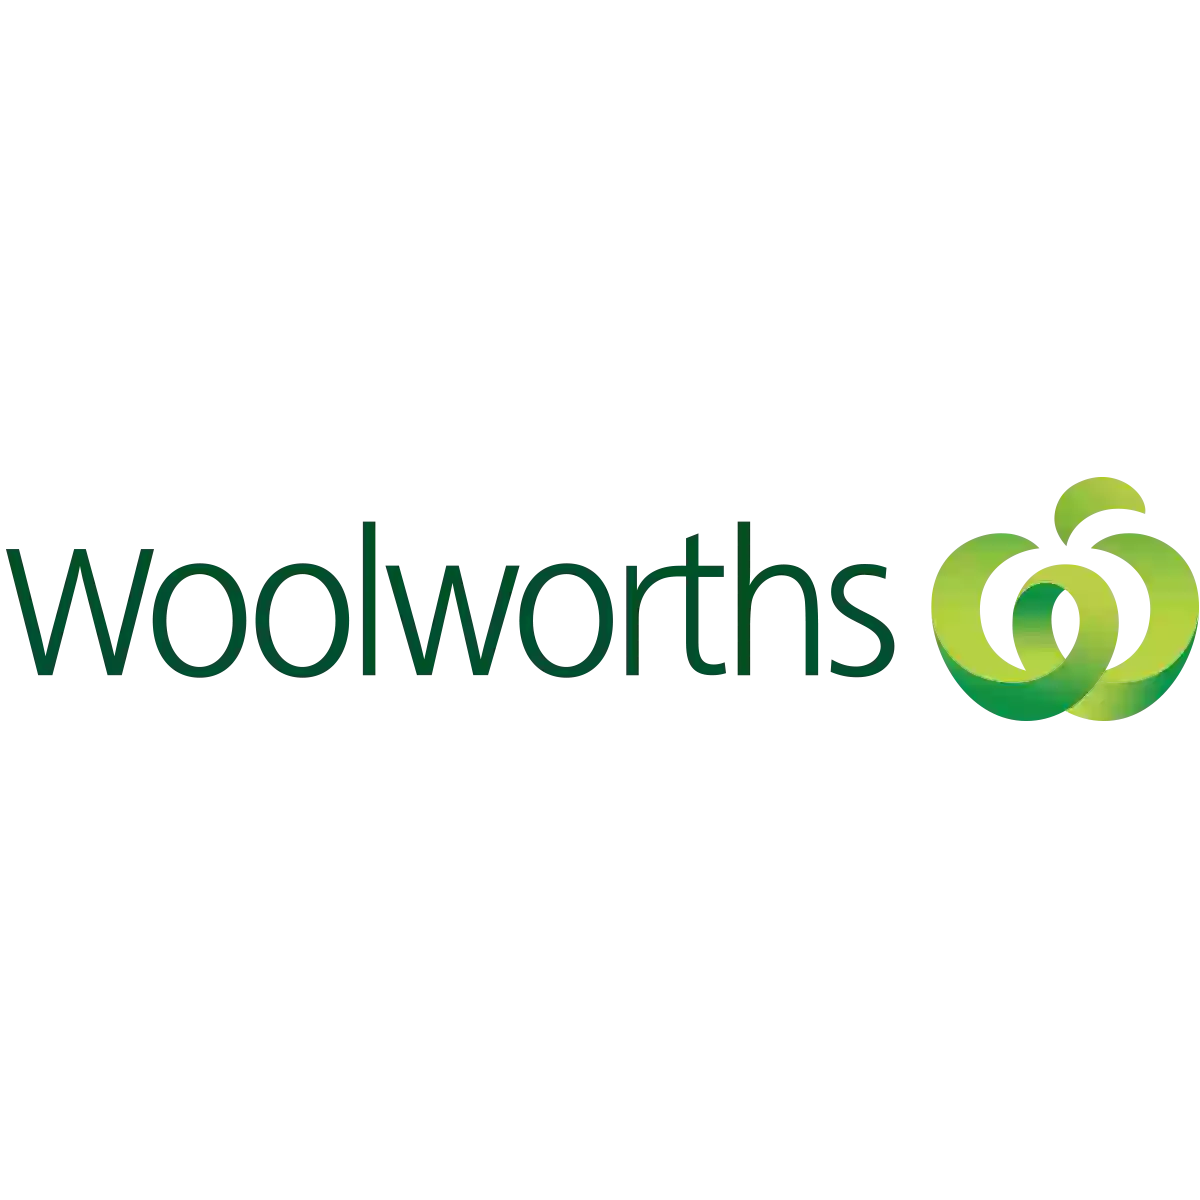 Woolworths Belmont